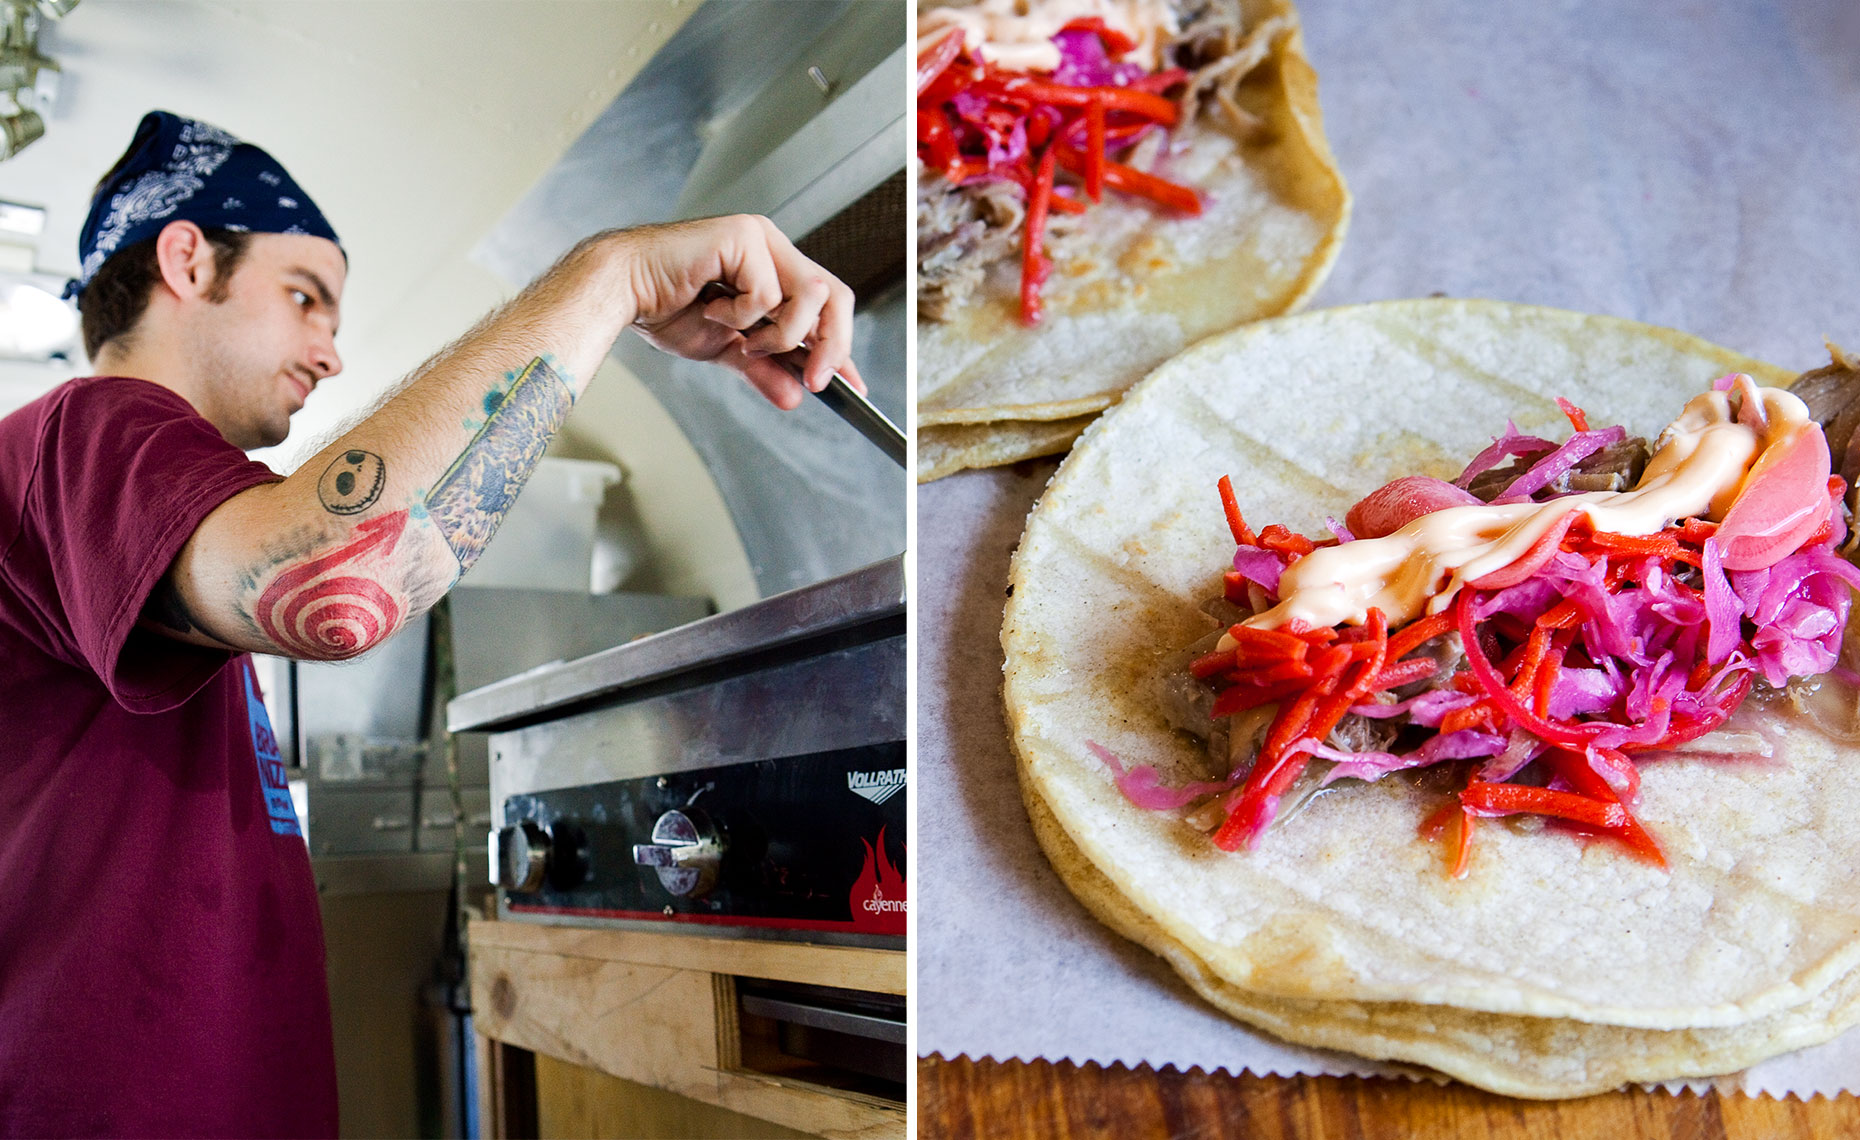 Making tacos inside a food truck